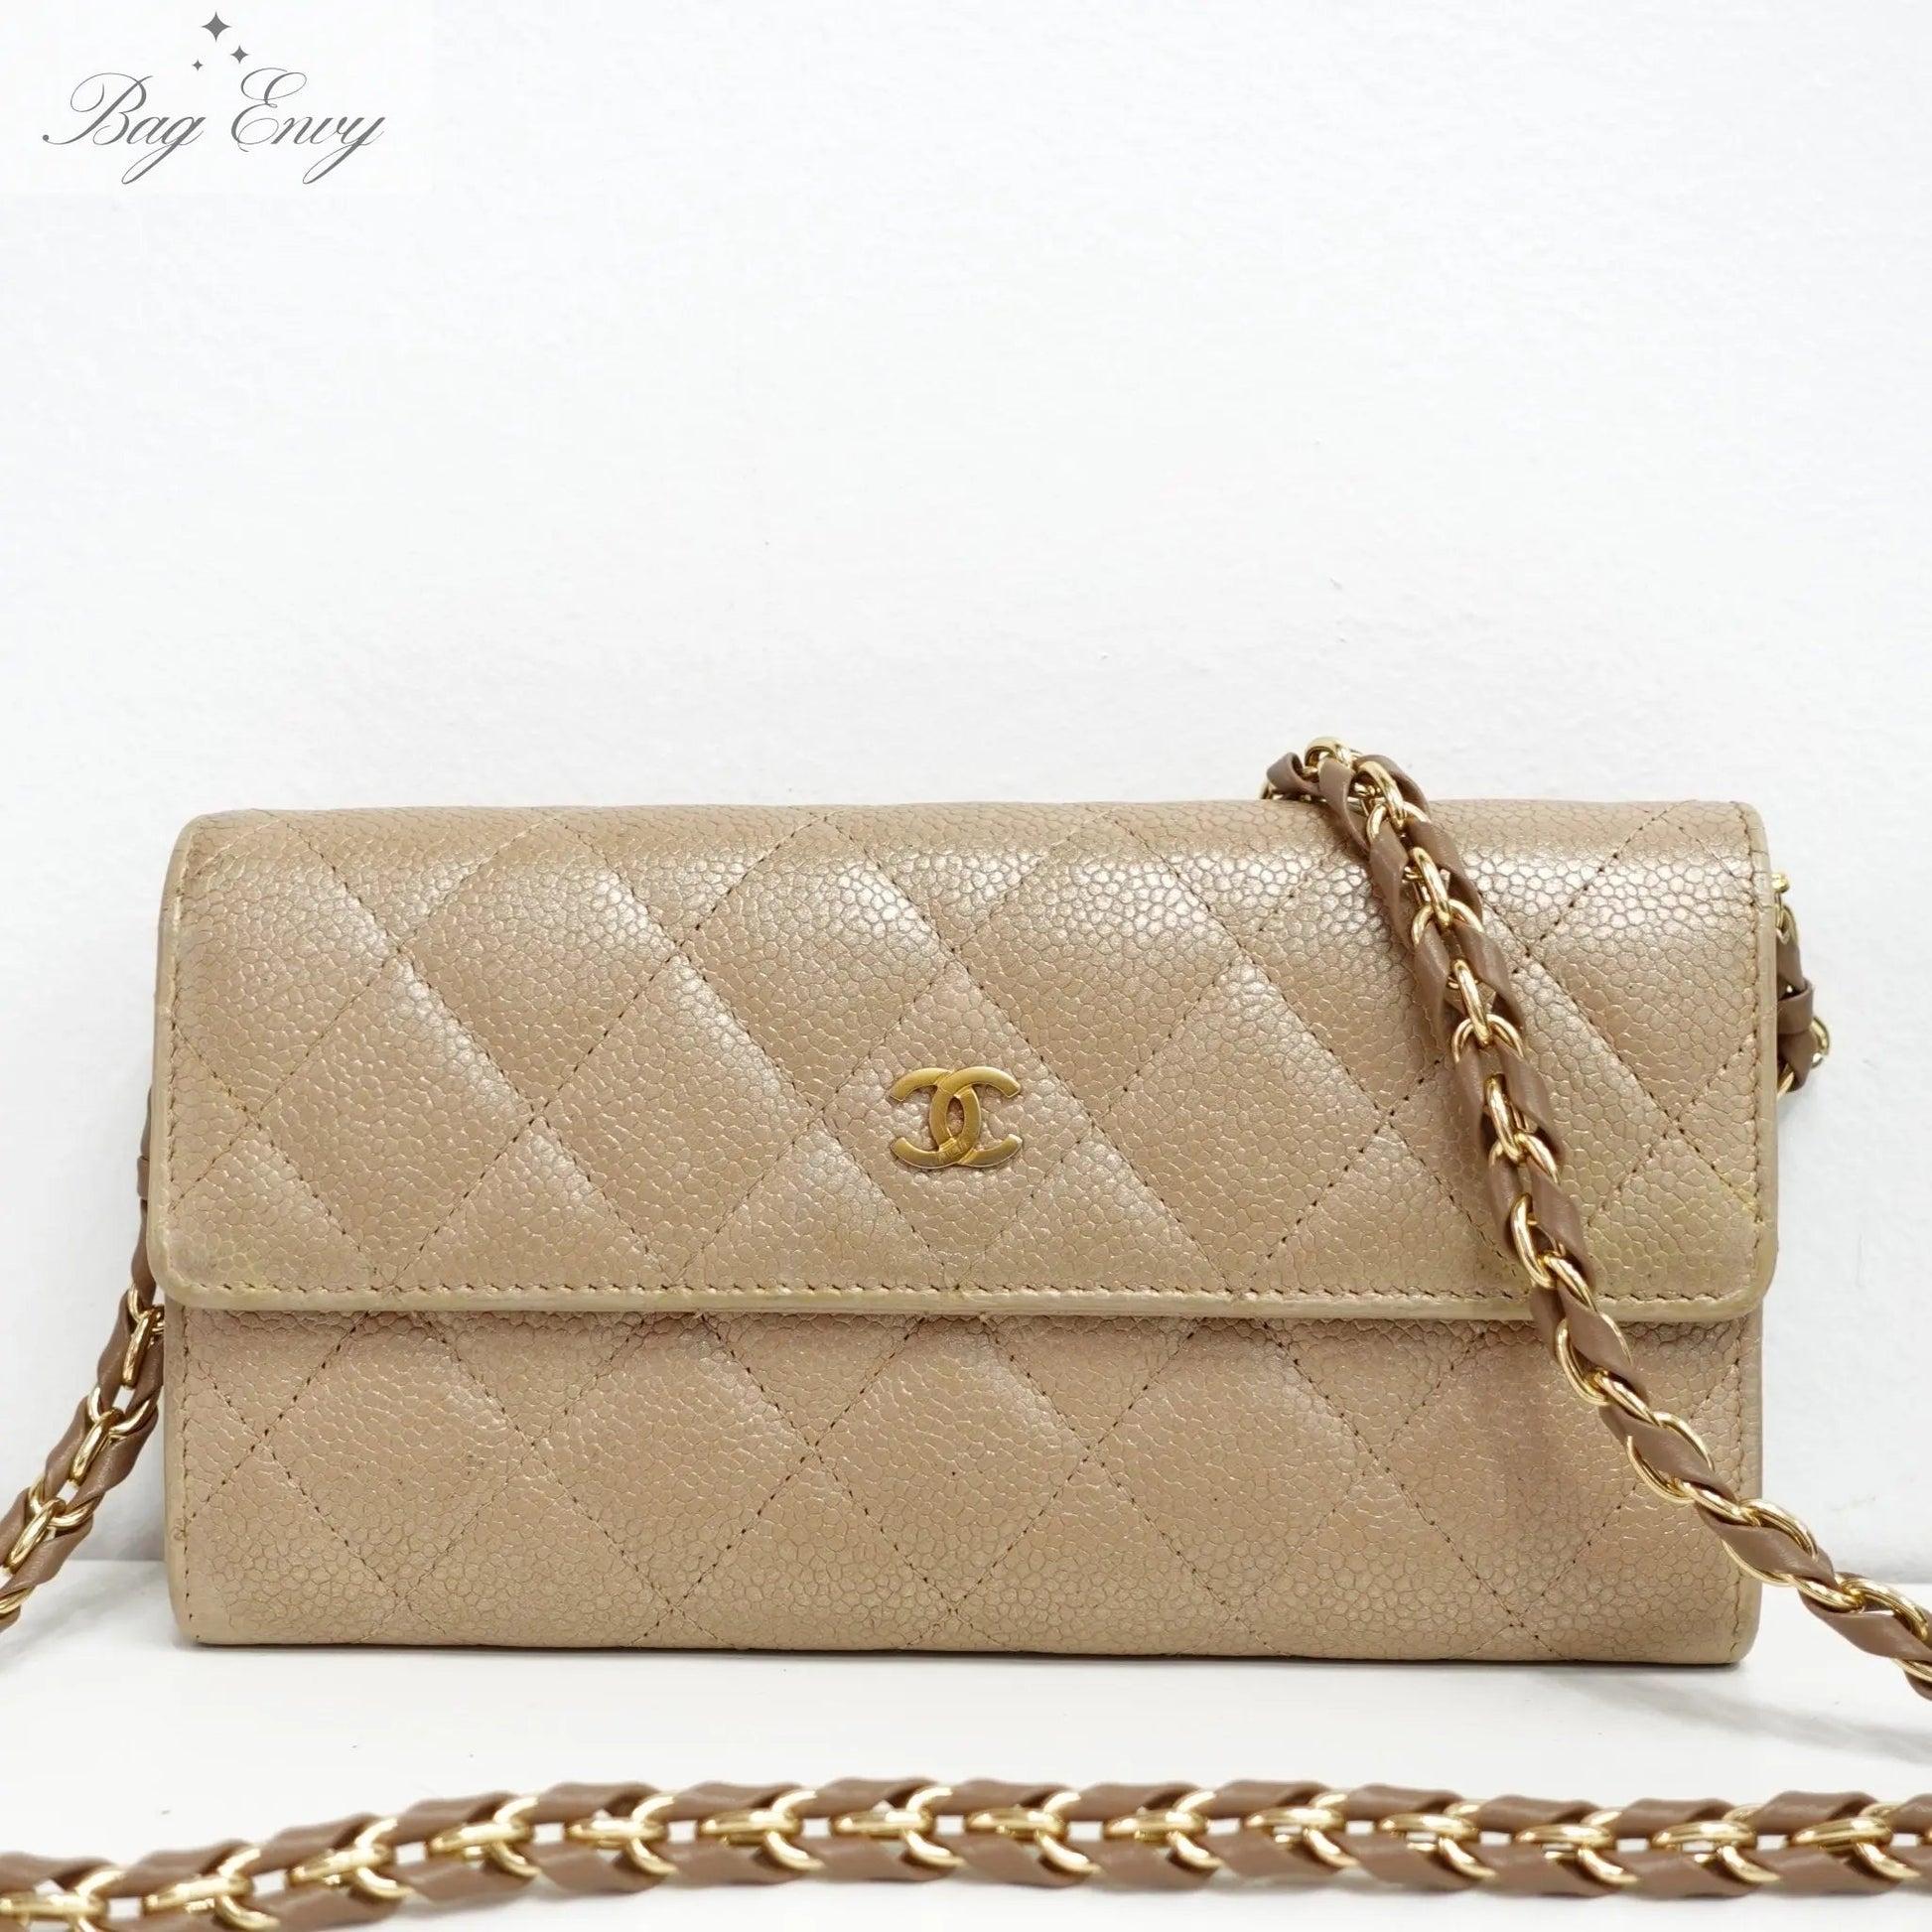 CHANEL Caviar Long Flap Wallet with Unbranded Chain - Bag Envy